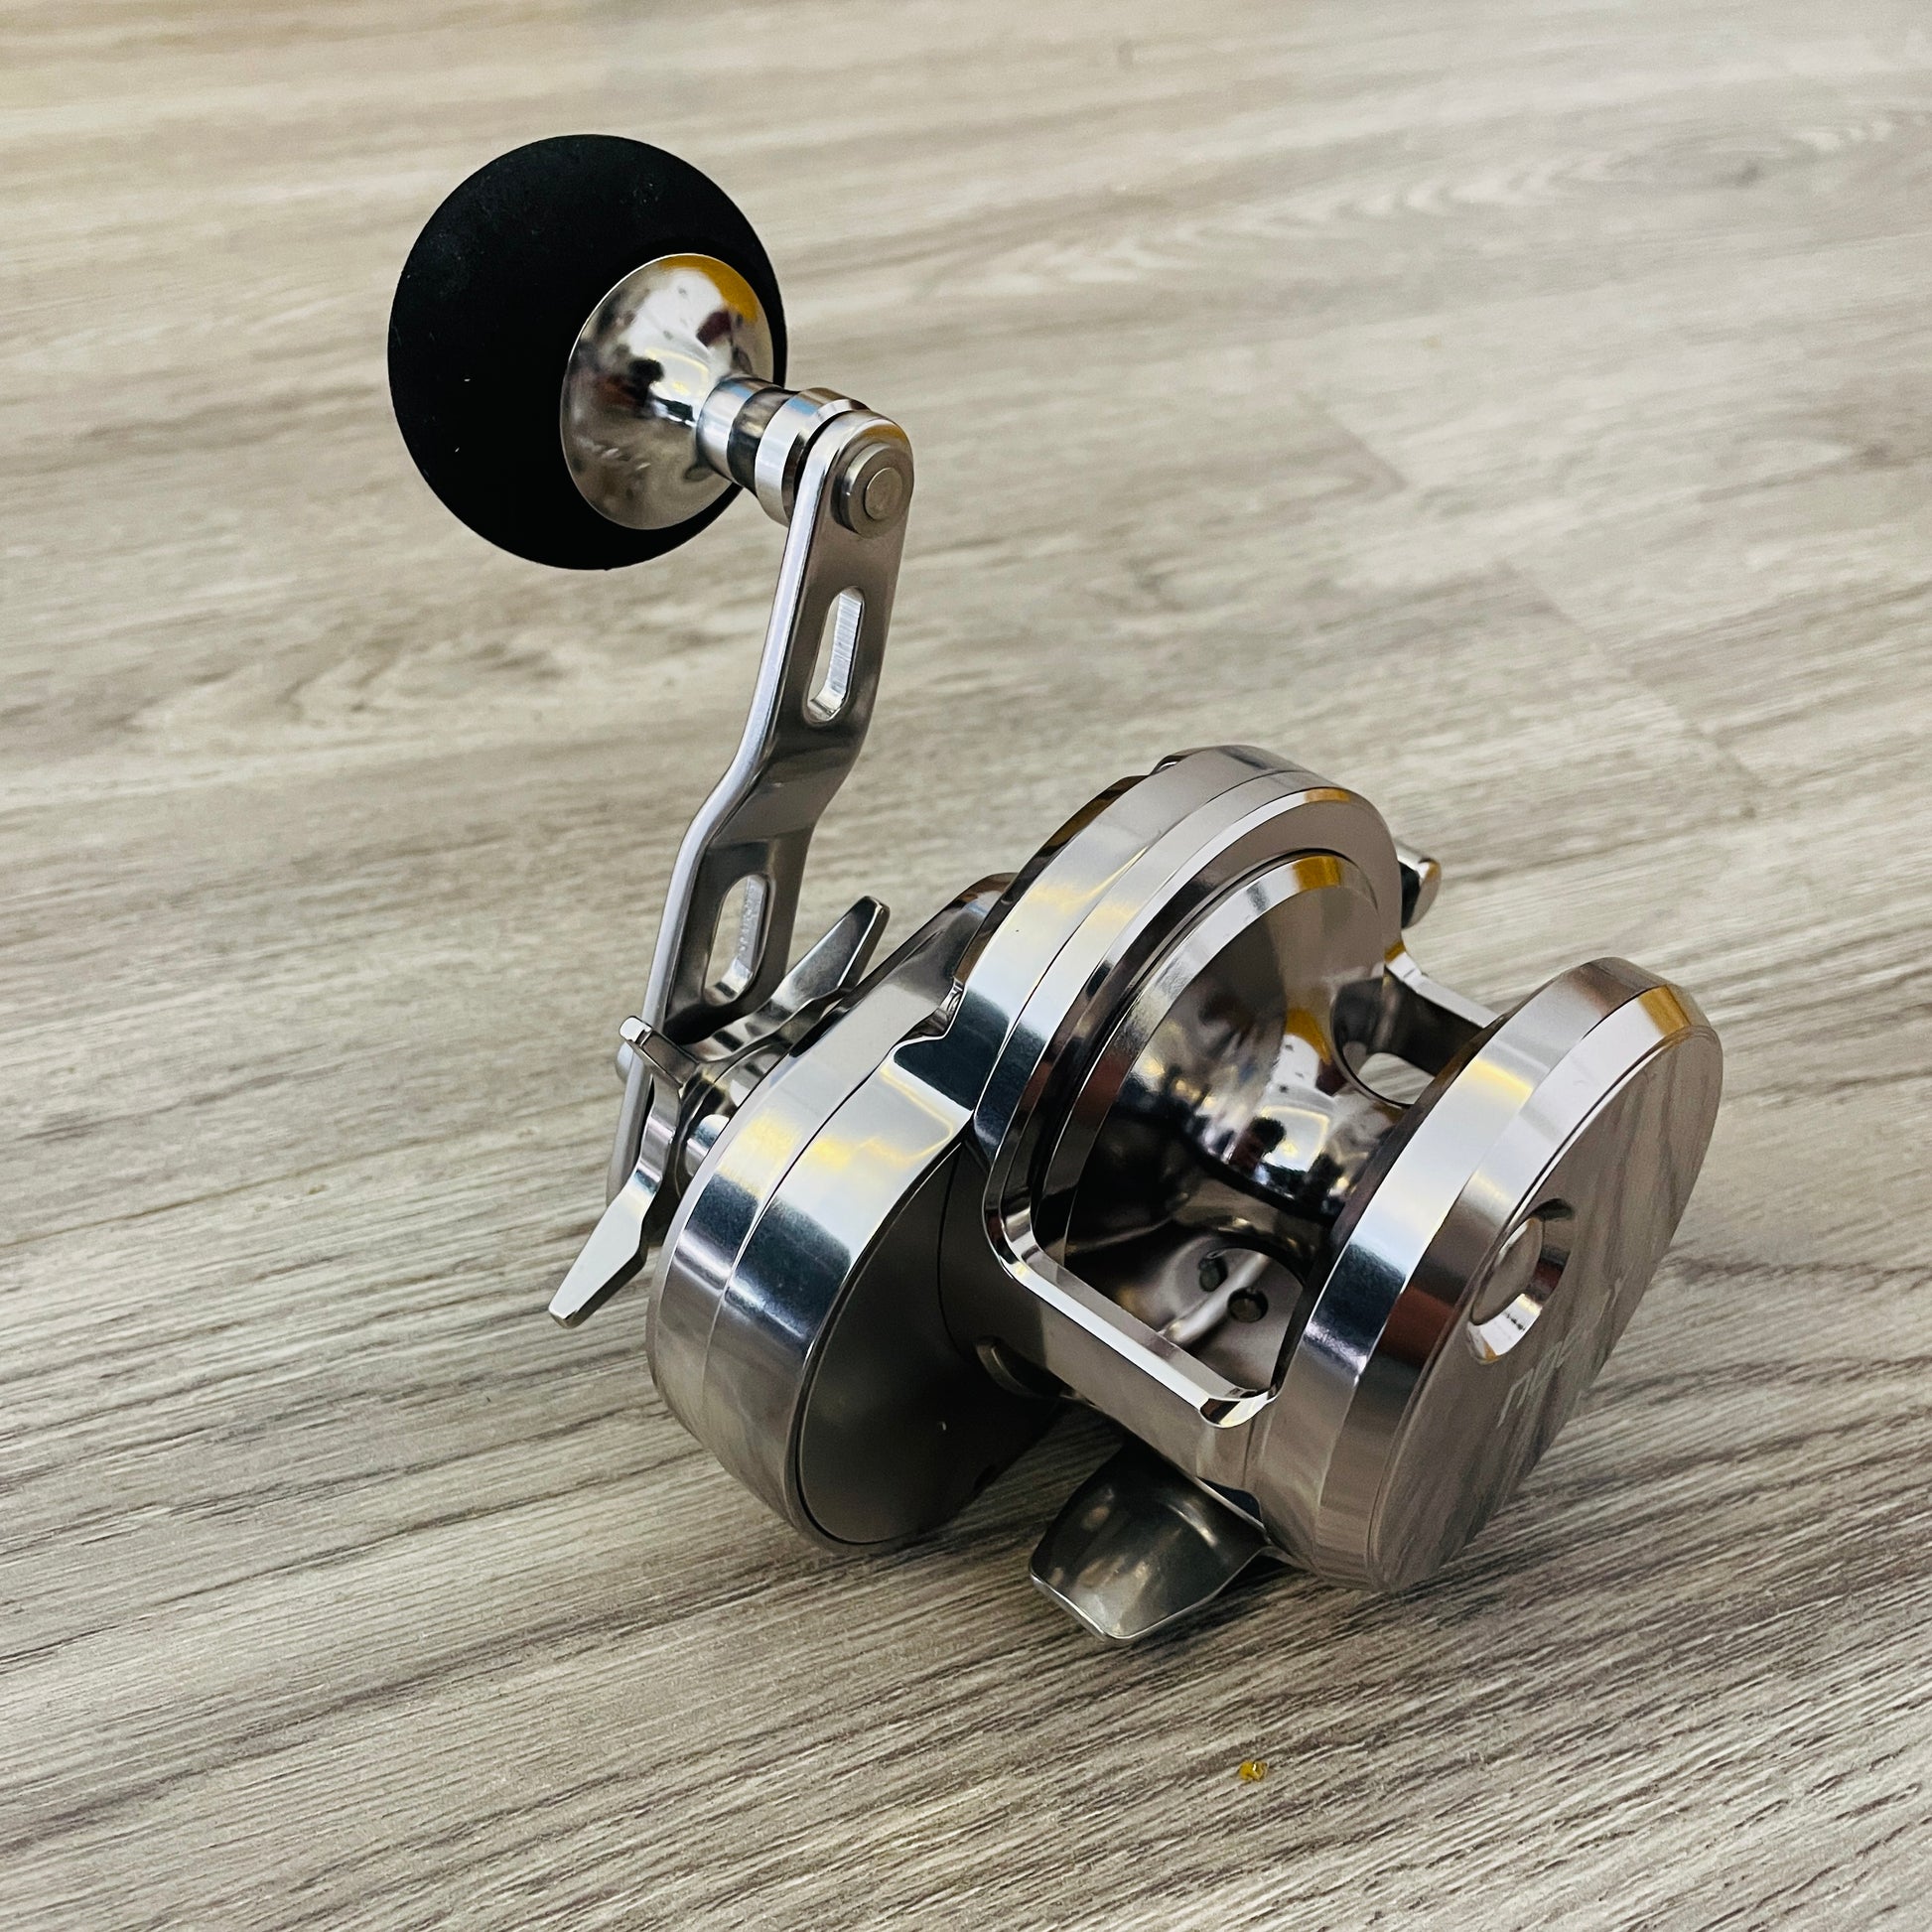 A GREAT 2500 SIZED SPIN REEL FOR MICRO JIGGING